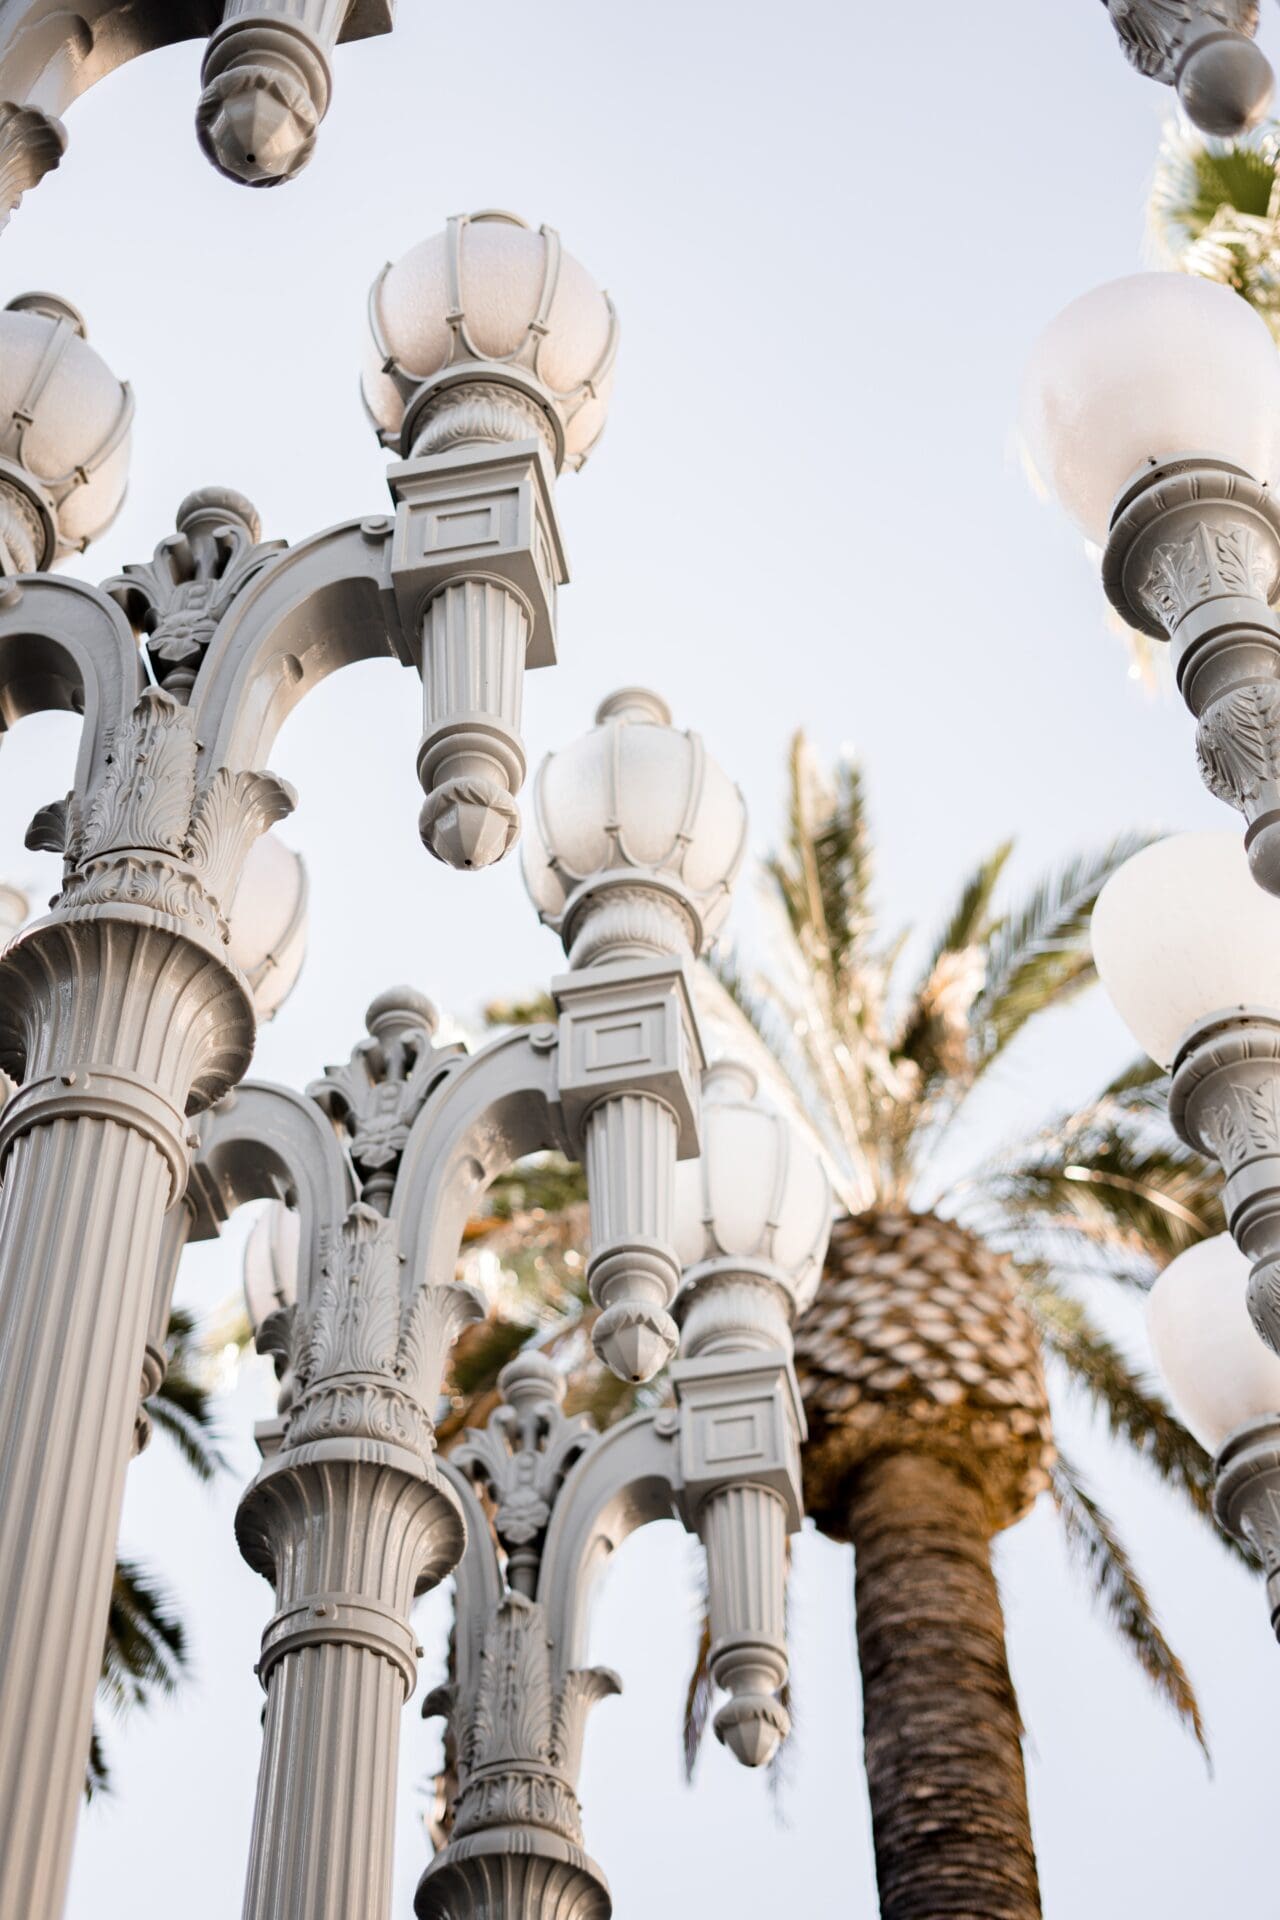 Best museums and galleries in London | A view of the restored street lamps at LACMA, with a palm tree in the background